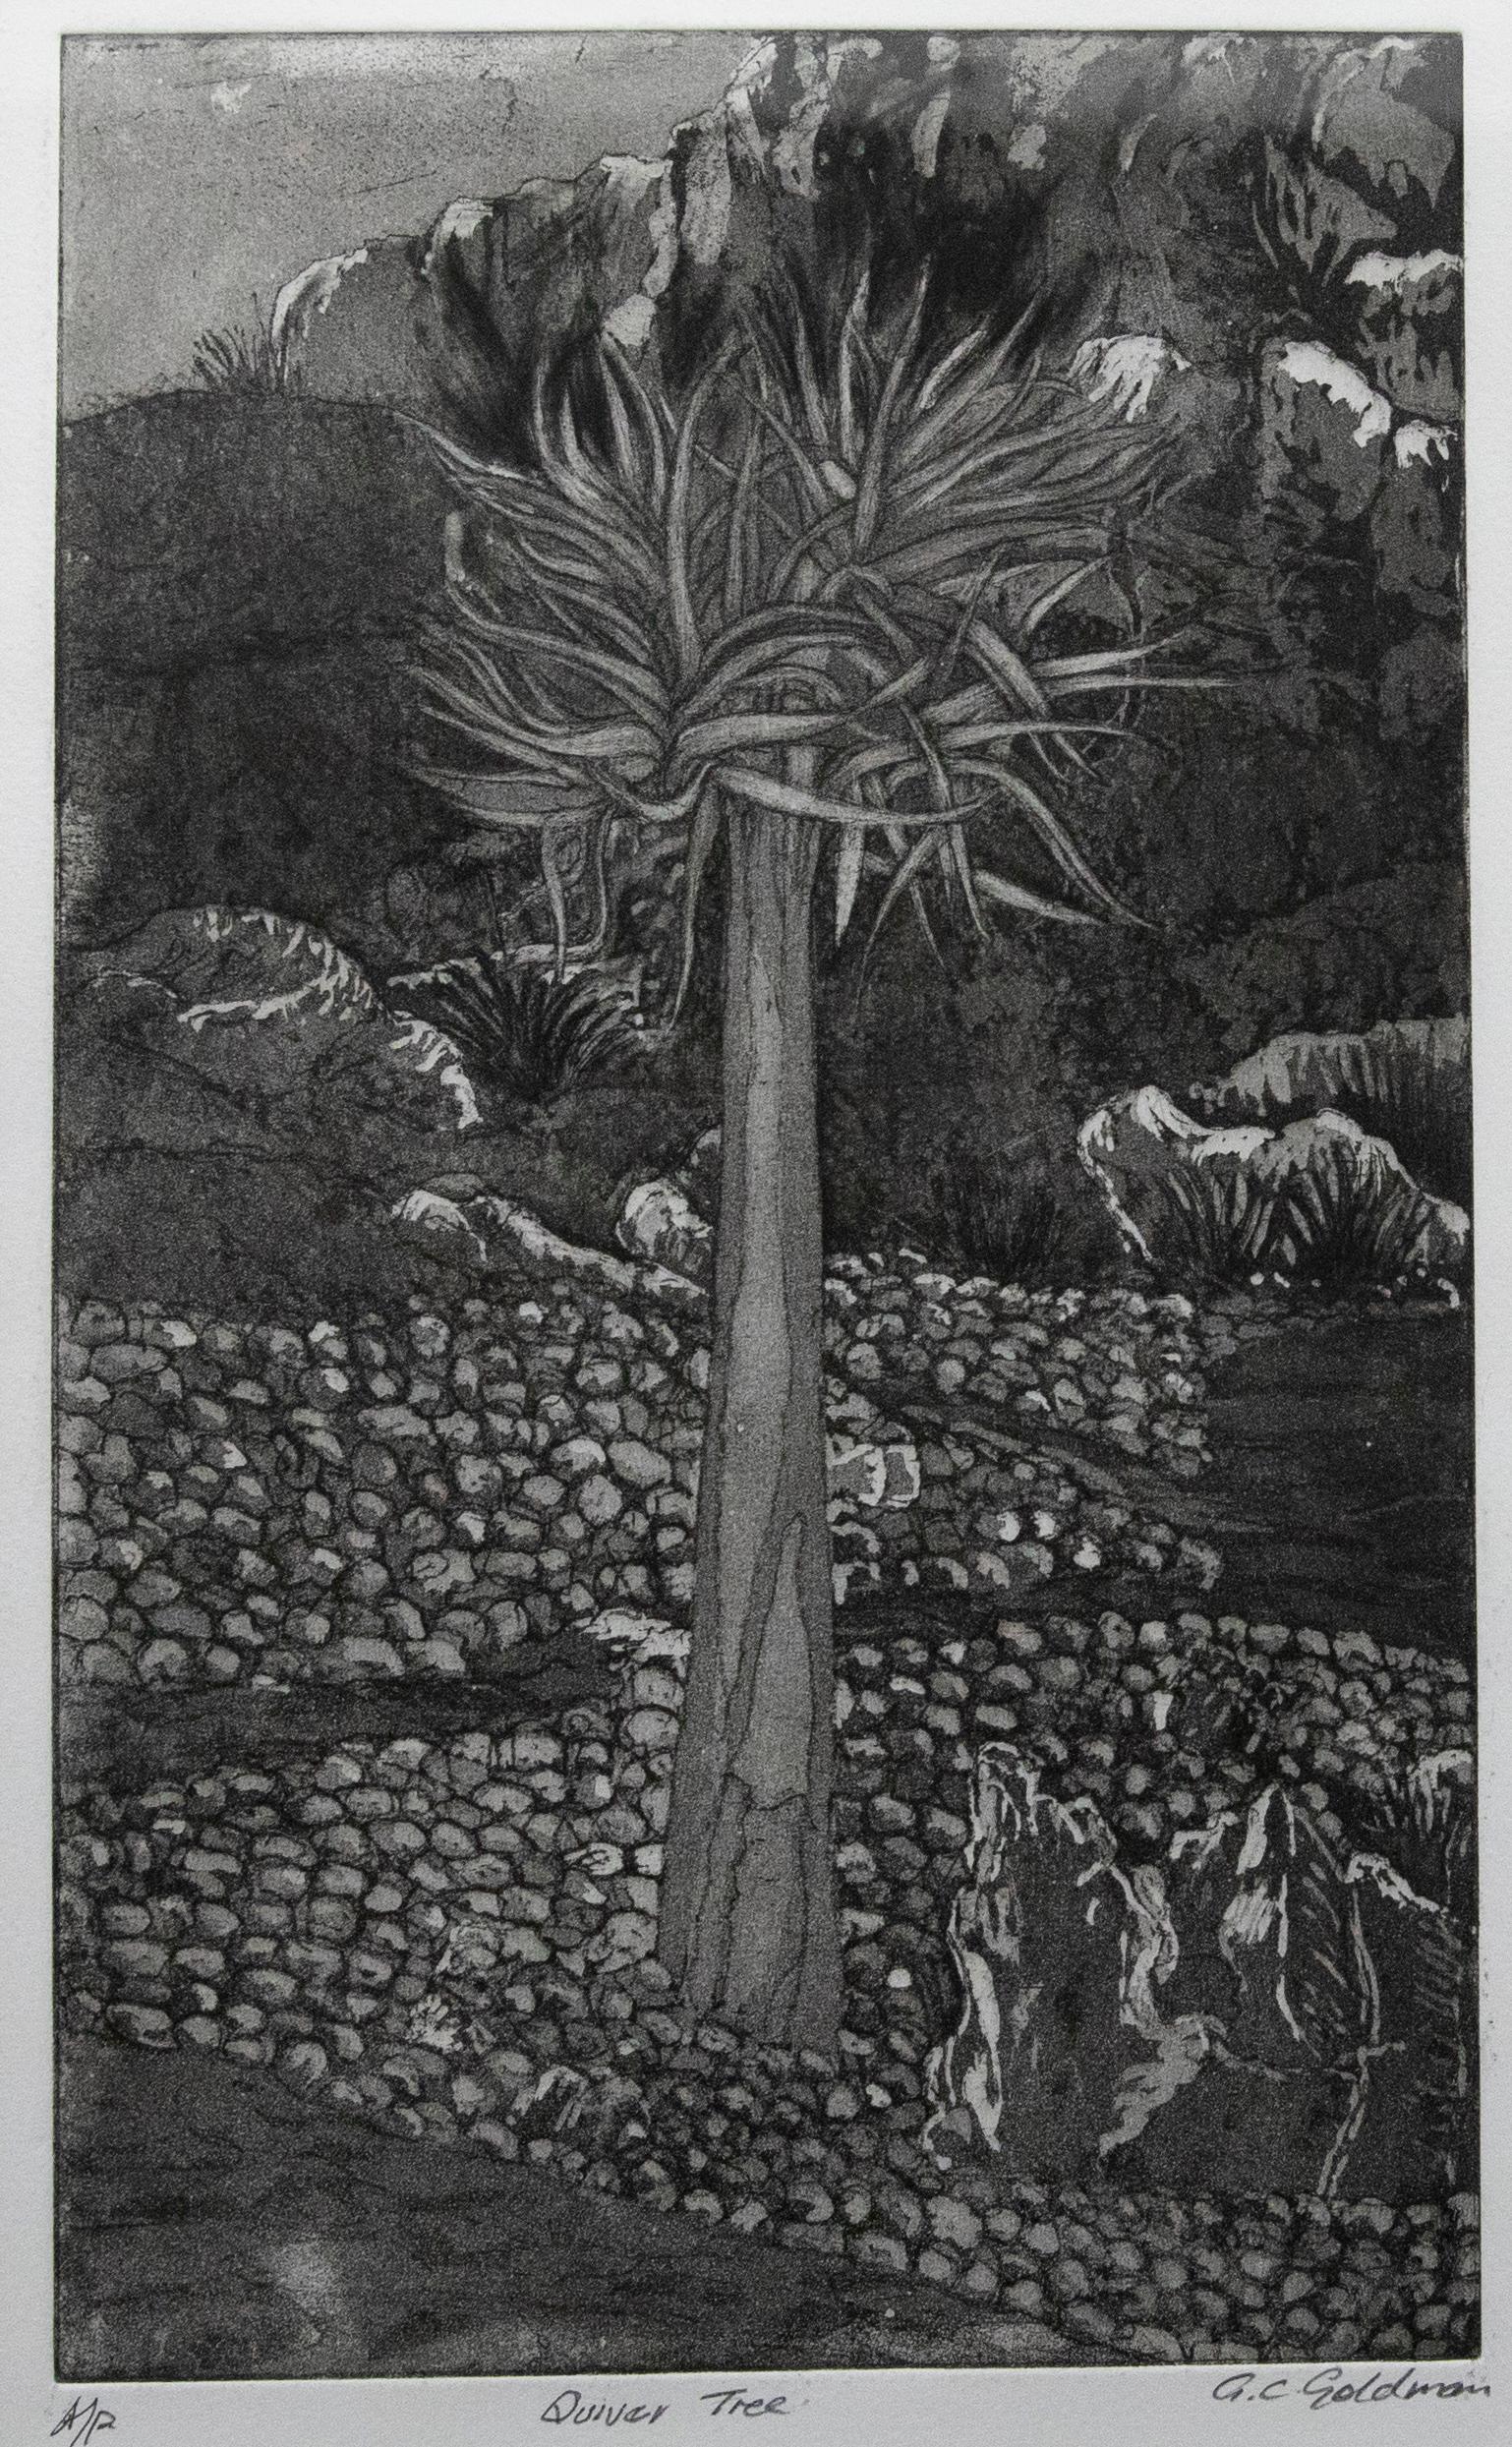 G. C. Goldman - Framed Contemporary Aquatint, Quiver Tree - Print by Unknown